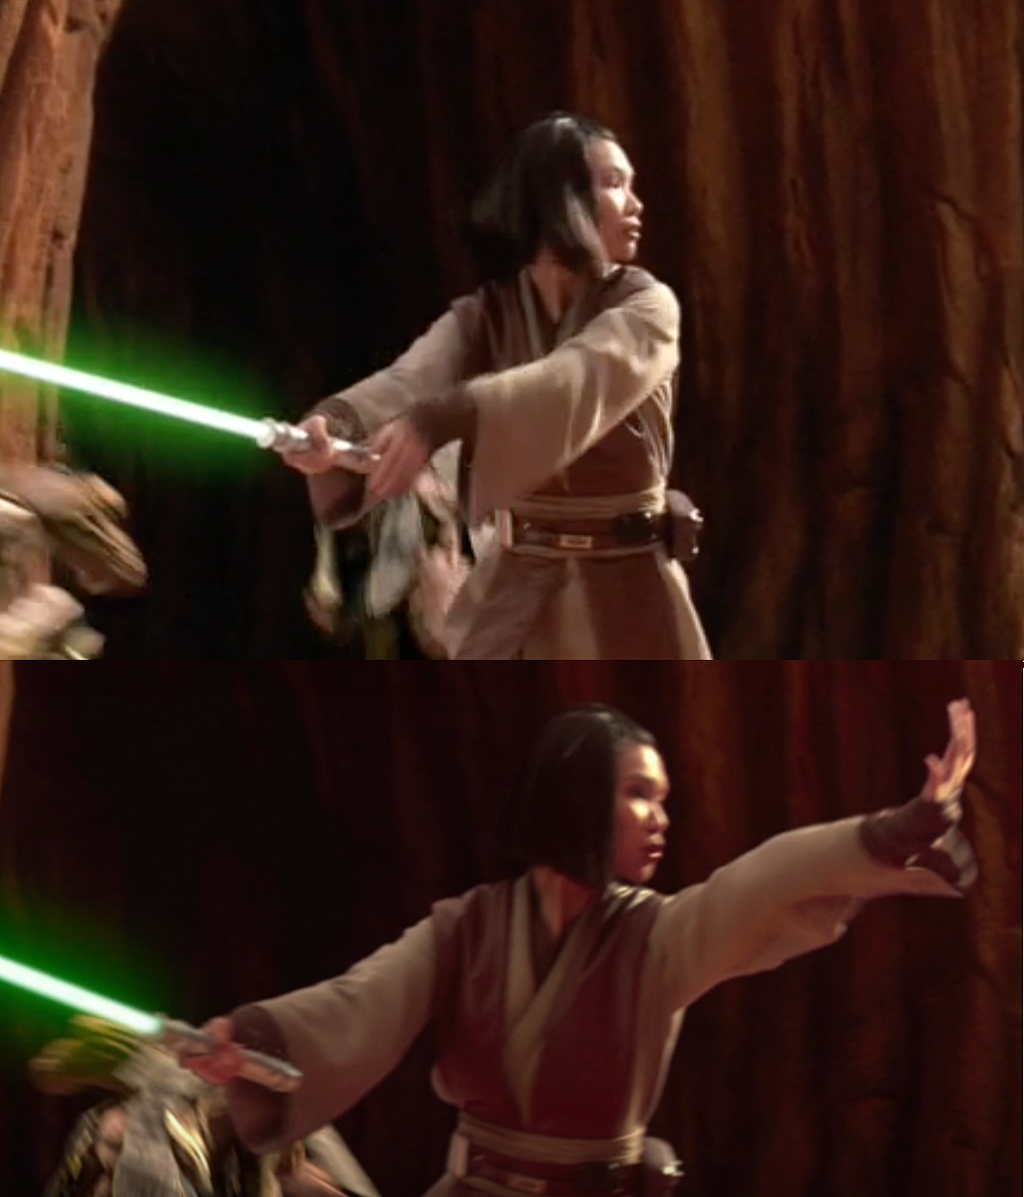 Jedi Knight Bultar Swan with her green lightsaber in ‘Star Wars: Episode II — Attack Of The Clones.’